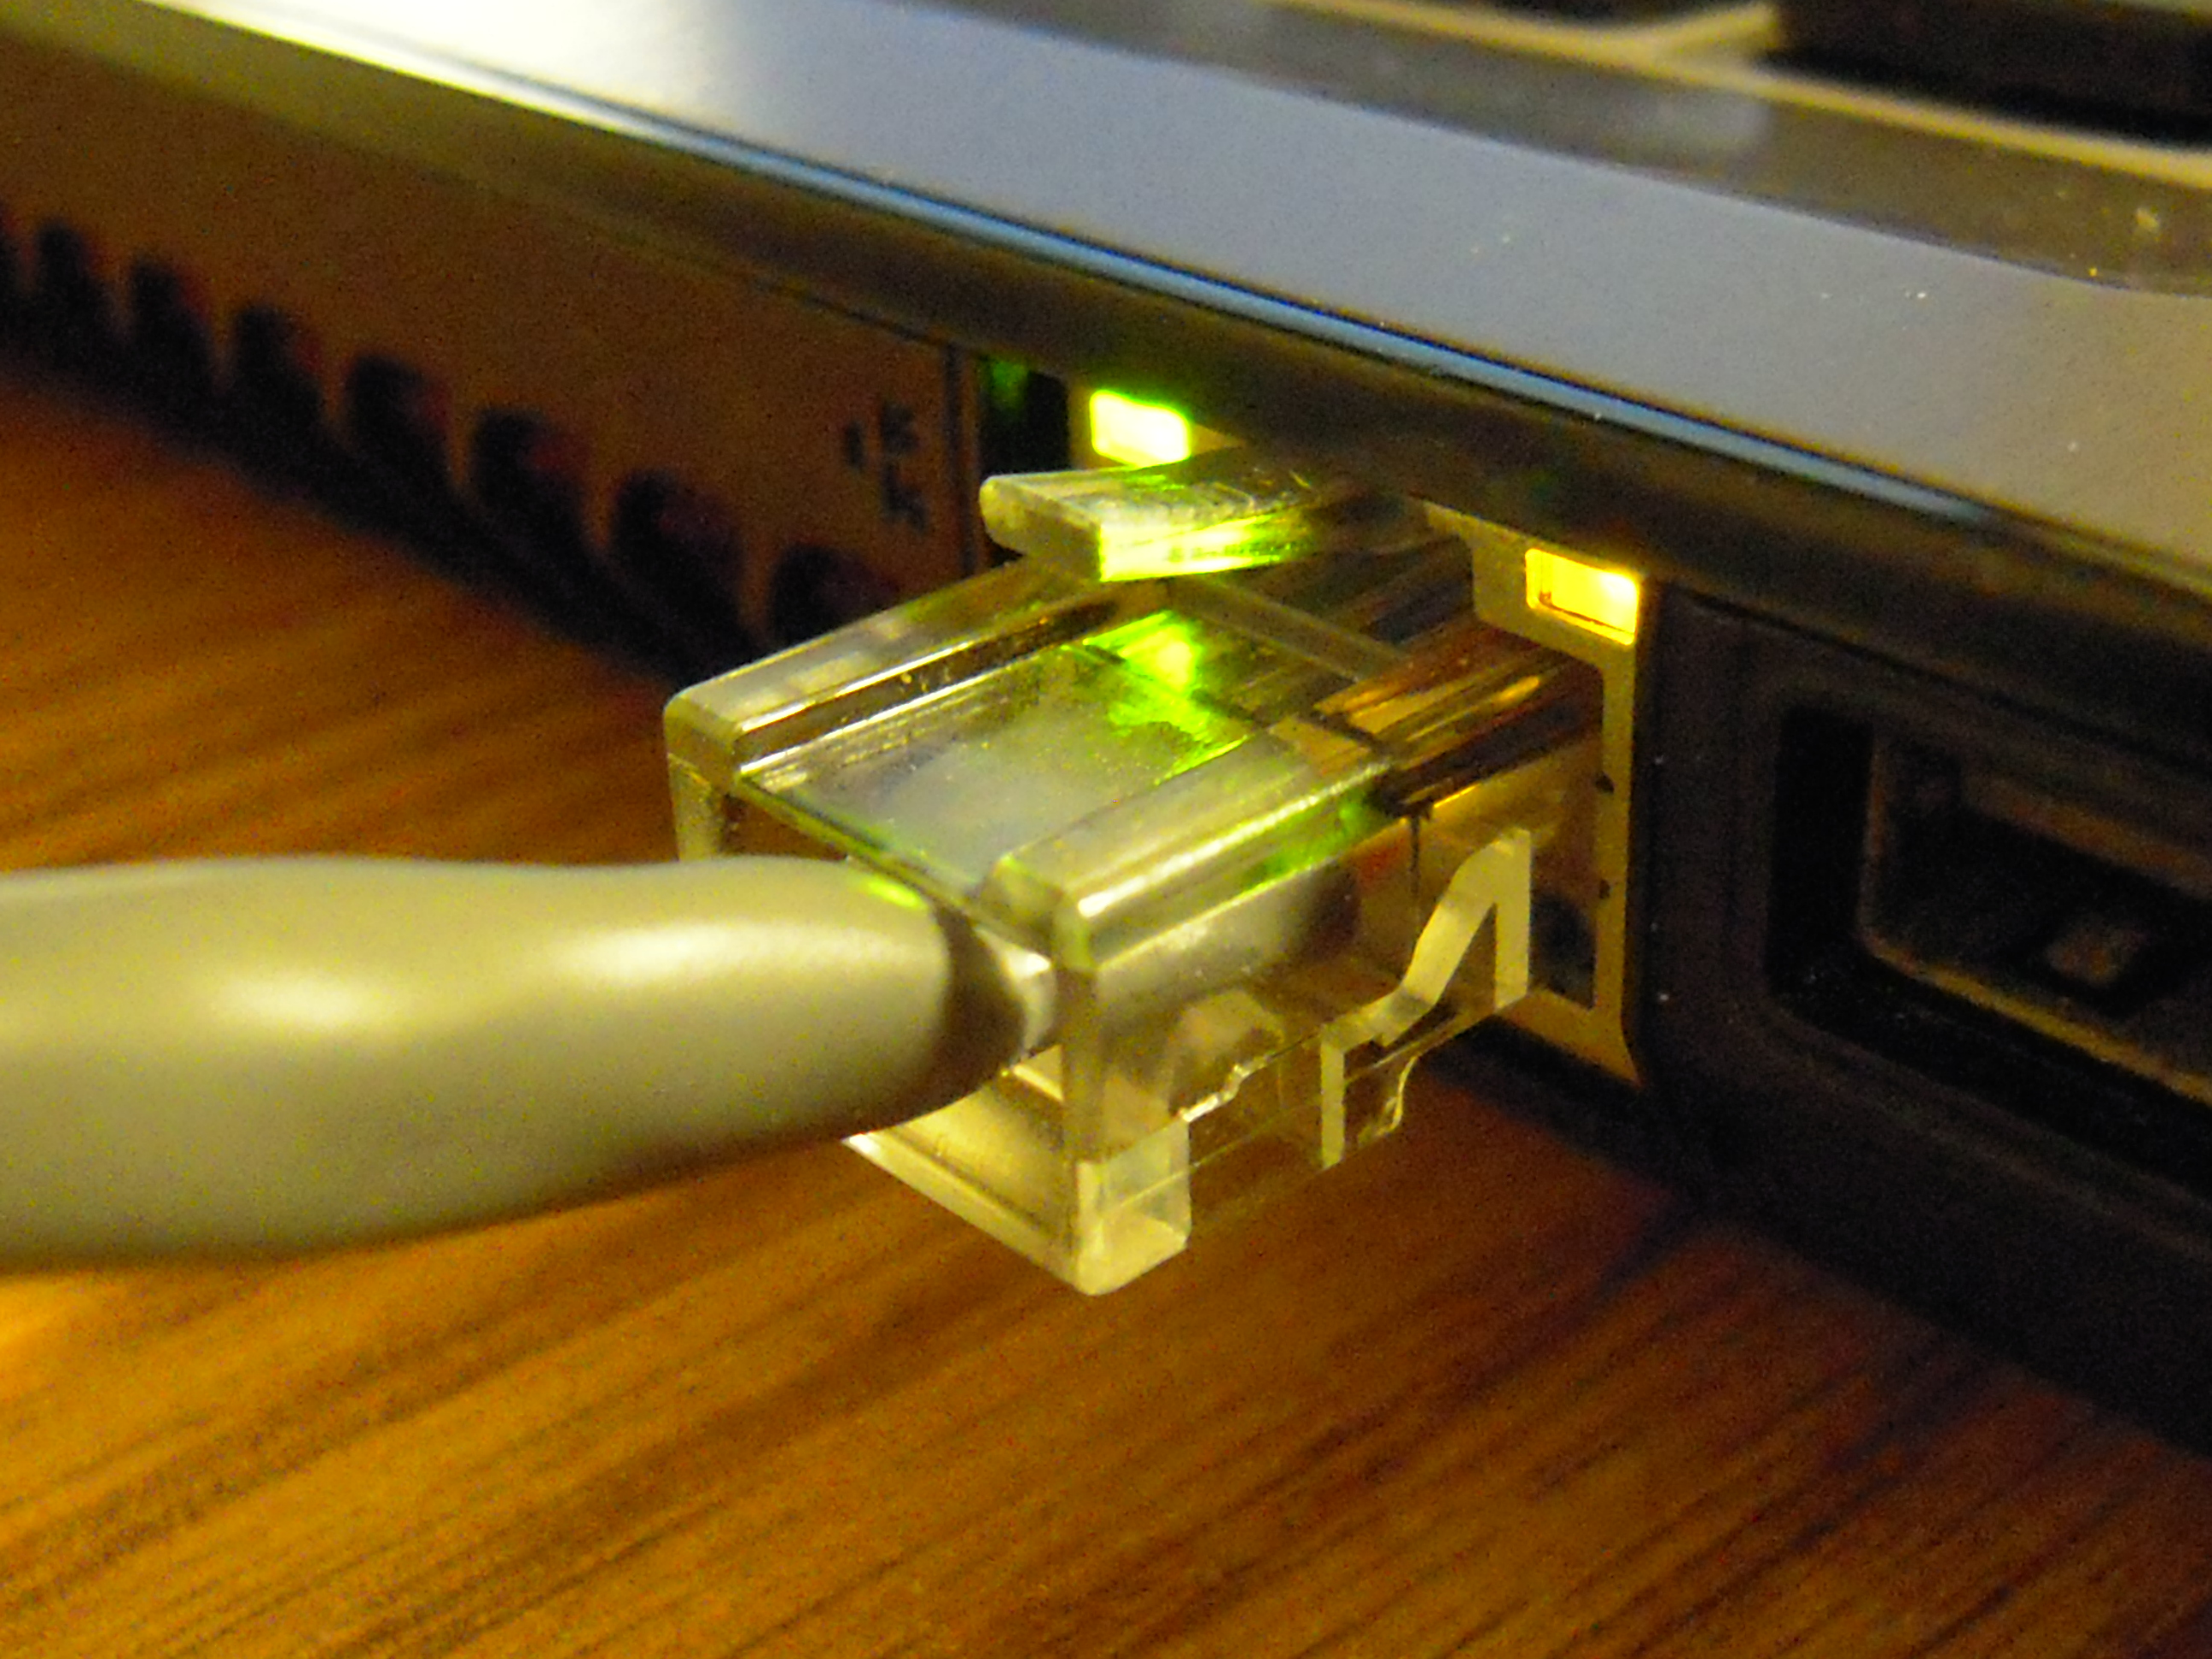 Ethernet cable being inserted into a computer port